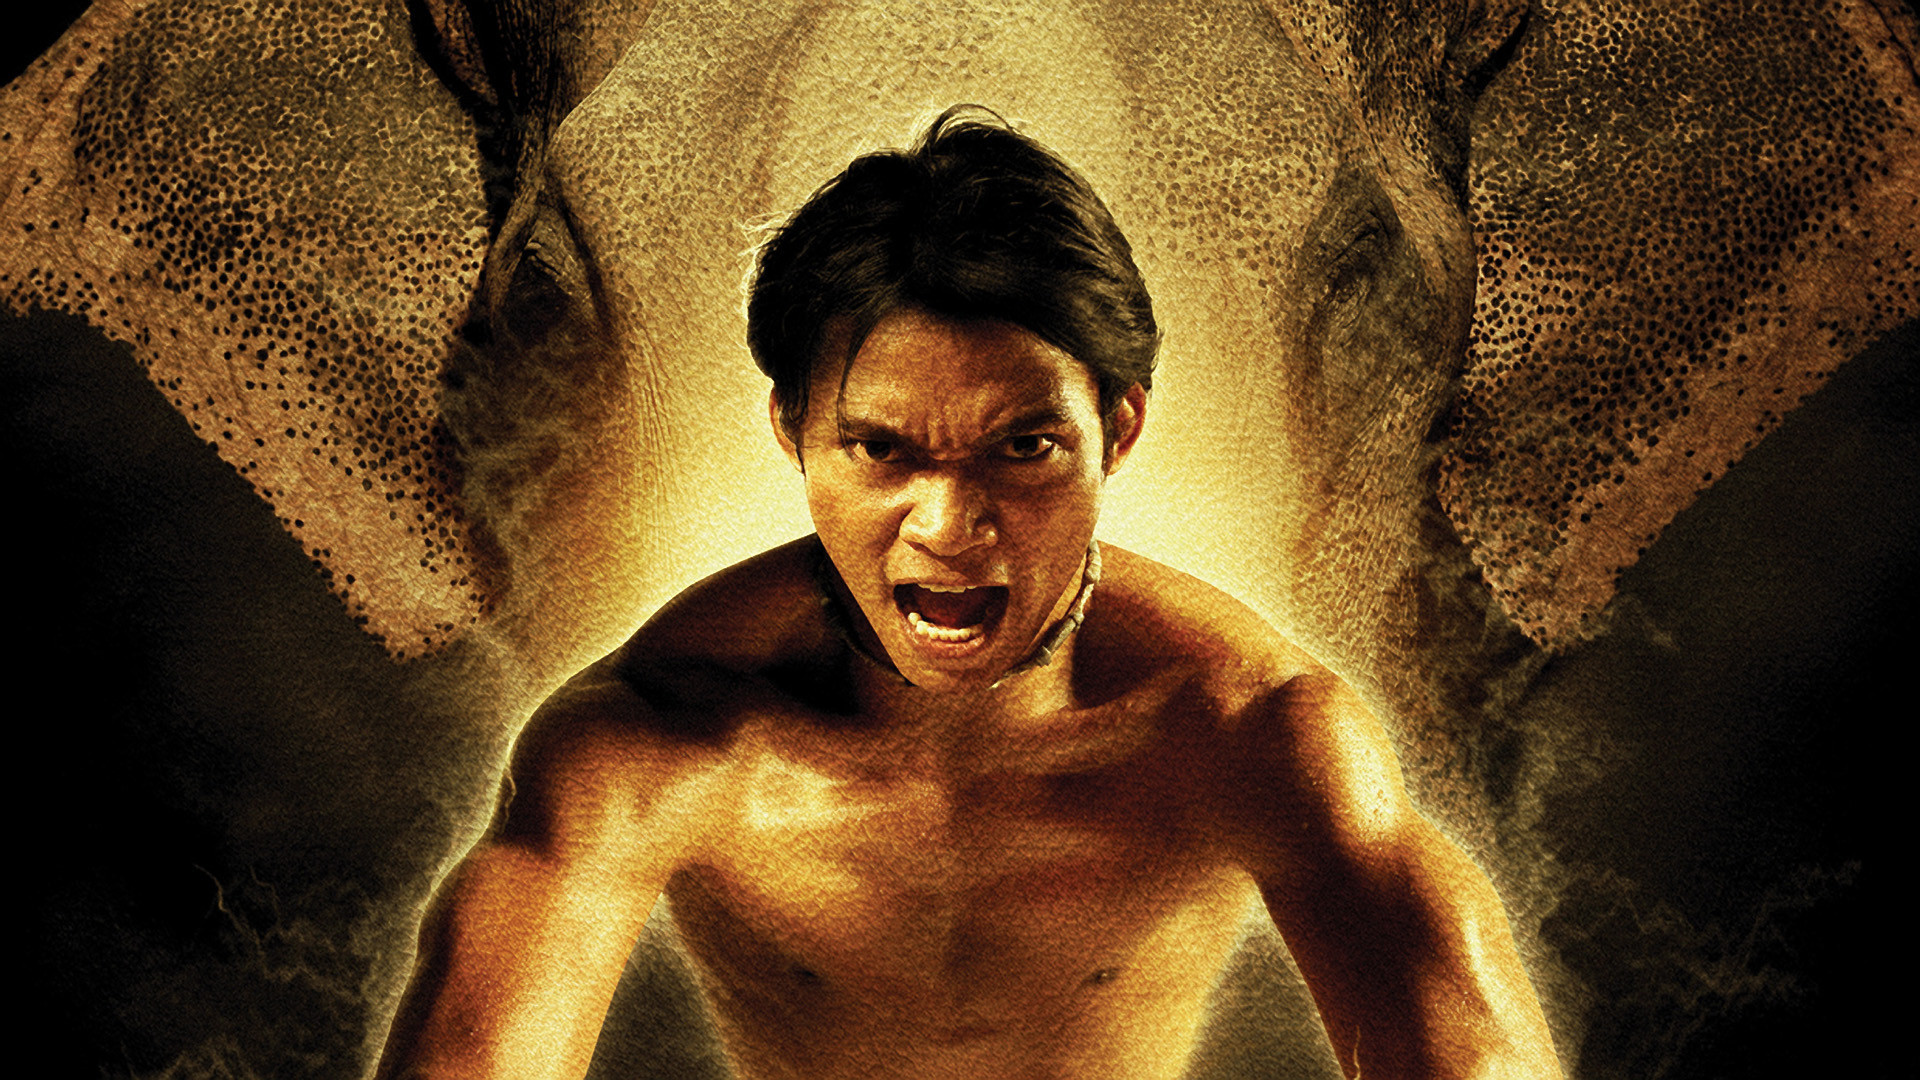 Tony Jaa Wallpaper High Resolution And Quality